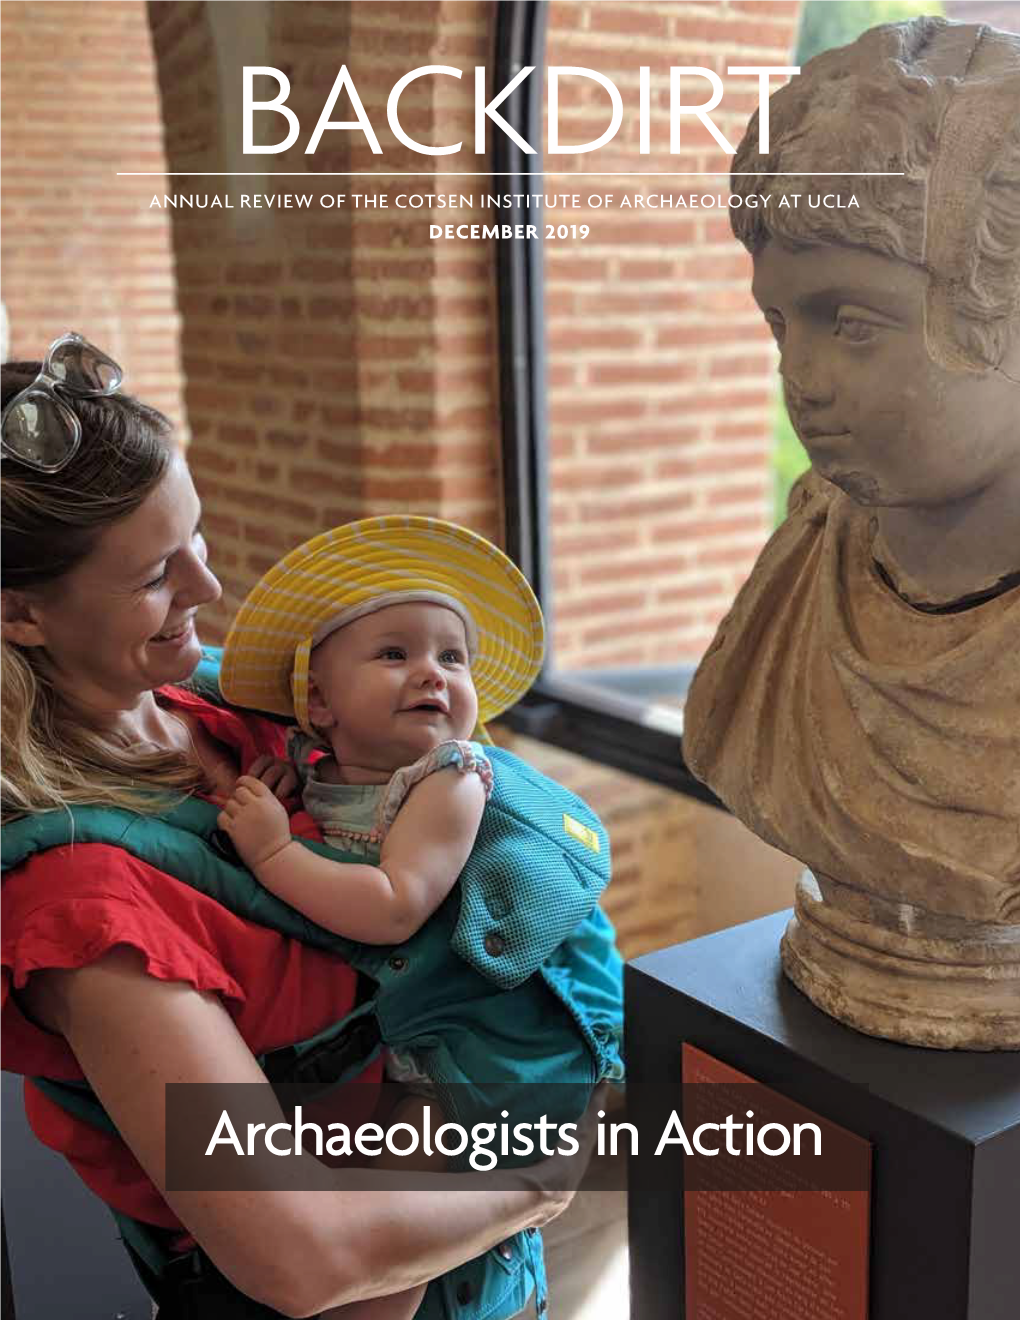 Archaeologists in Action BACKDIRT ANNUAL REVIEW of the COTSEN INSTITUTE of ARCHAEOLOGY at UCLA